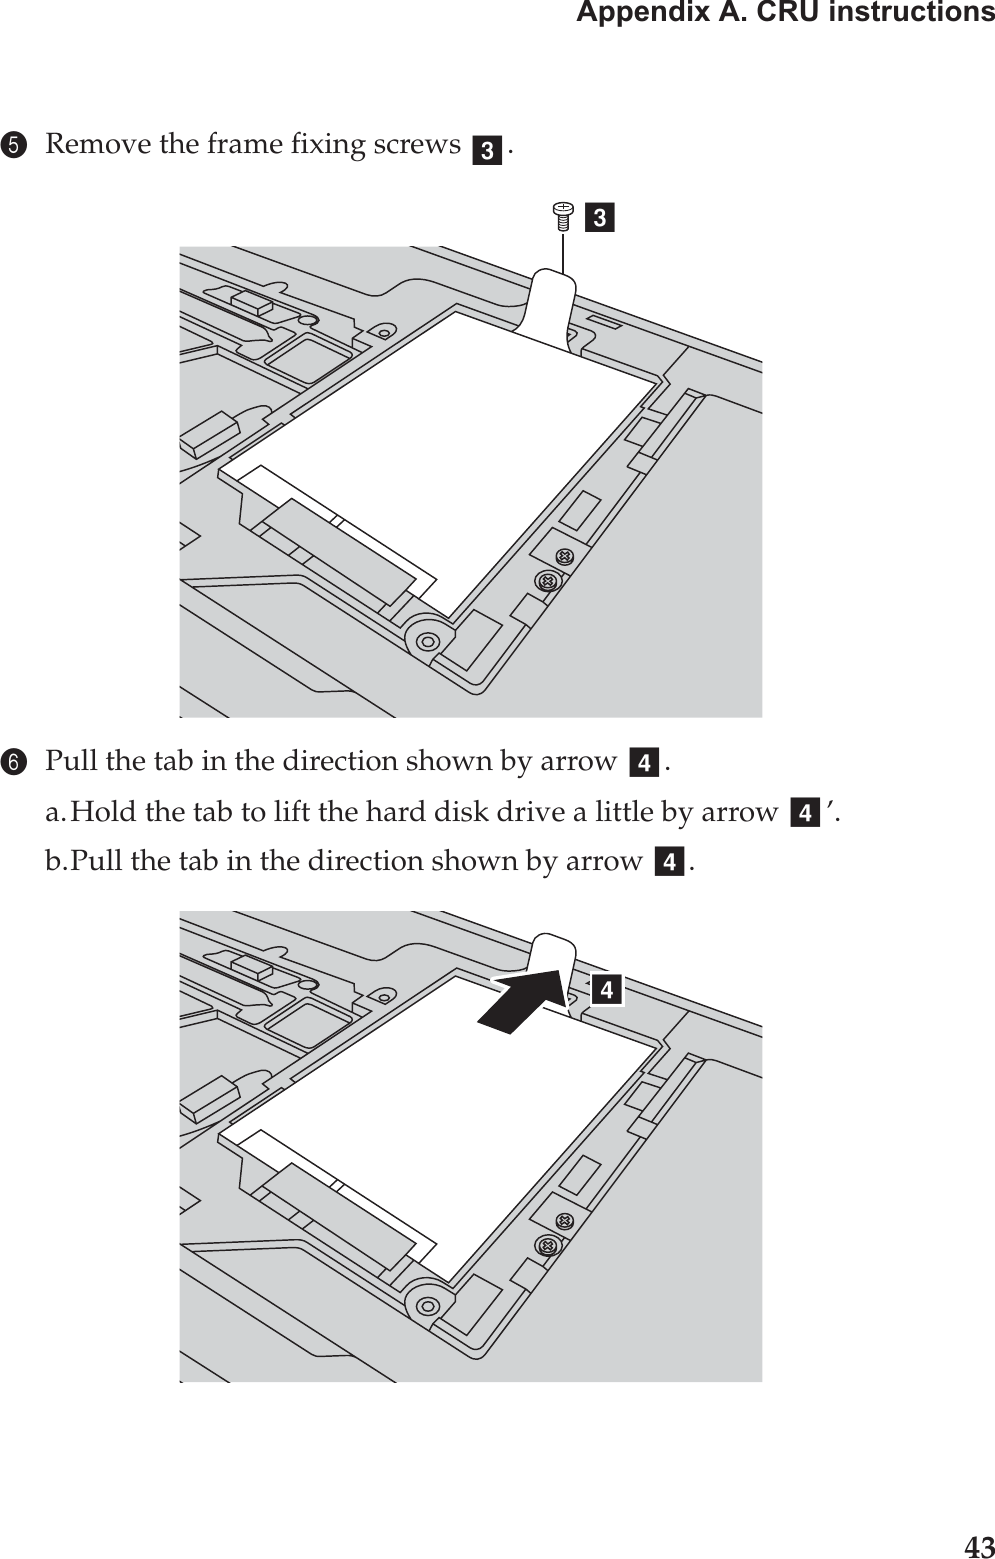 Appendix A. CRU instructions435Remove the frame fixing screws  .6Pull the tab in the direction shown by arrow  .a.Hold the tab to lift the hard disk drive a little by arrow  .b.Pull the tab in the direction shown by arrow  .ccdd ’dd